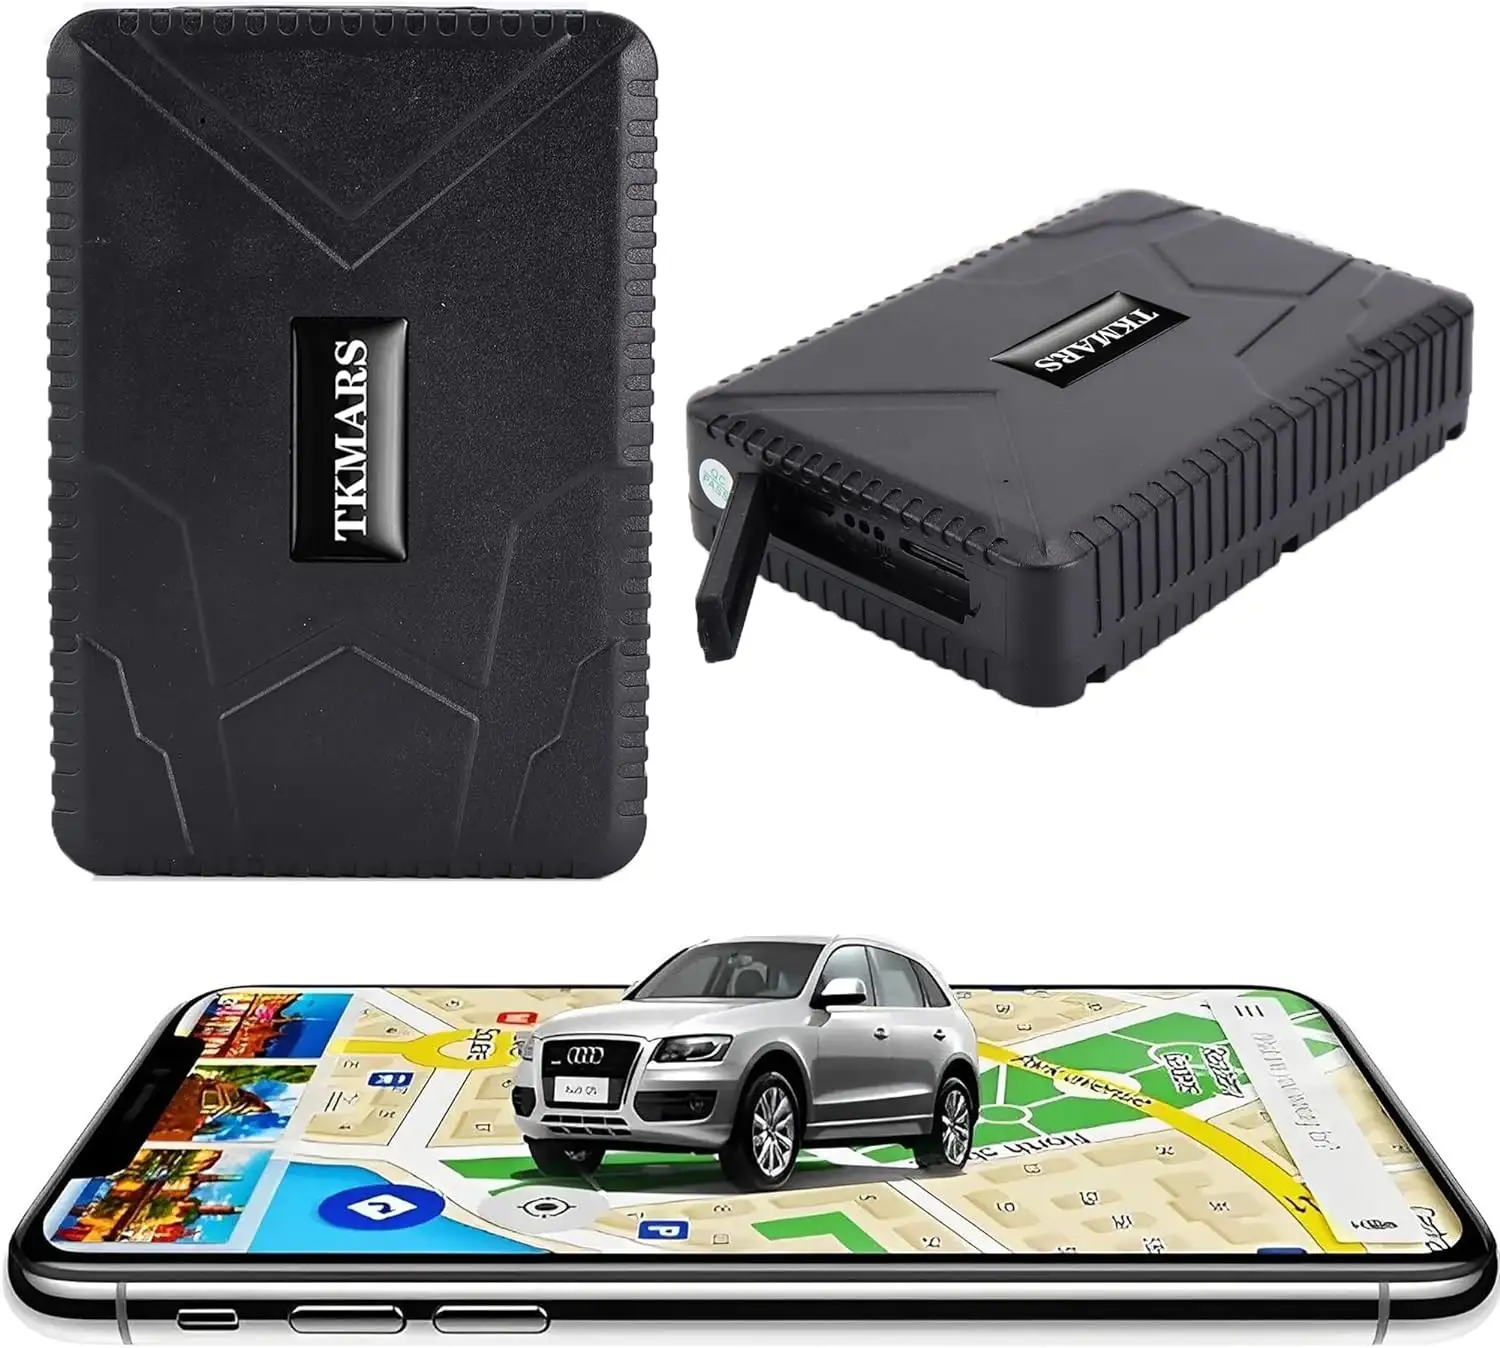 WINNES TK915 Car GPS Tracker Strong Magnetic 10000mAh battery long standby Vehicle Locator Real-time Tracking Free APP